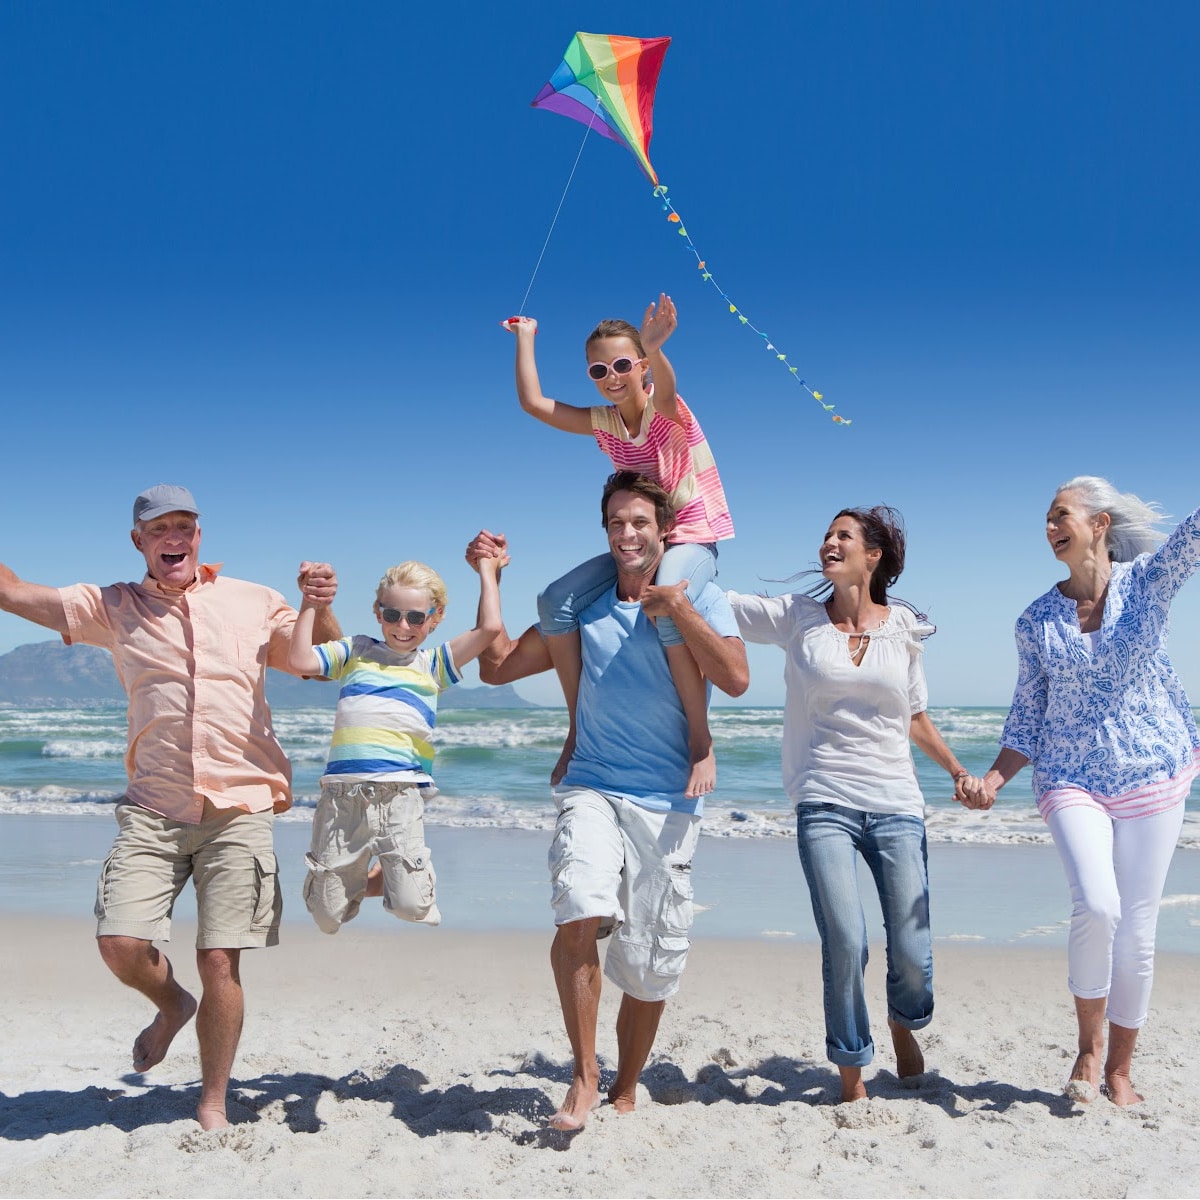 Family of 4 and grandparents flying kite at the beach